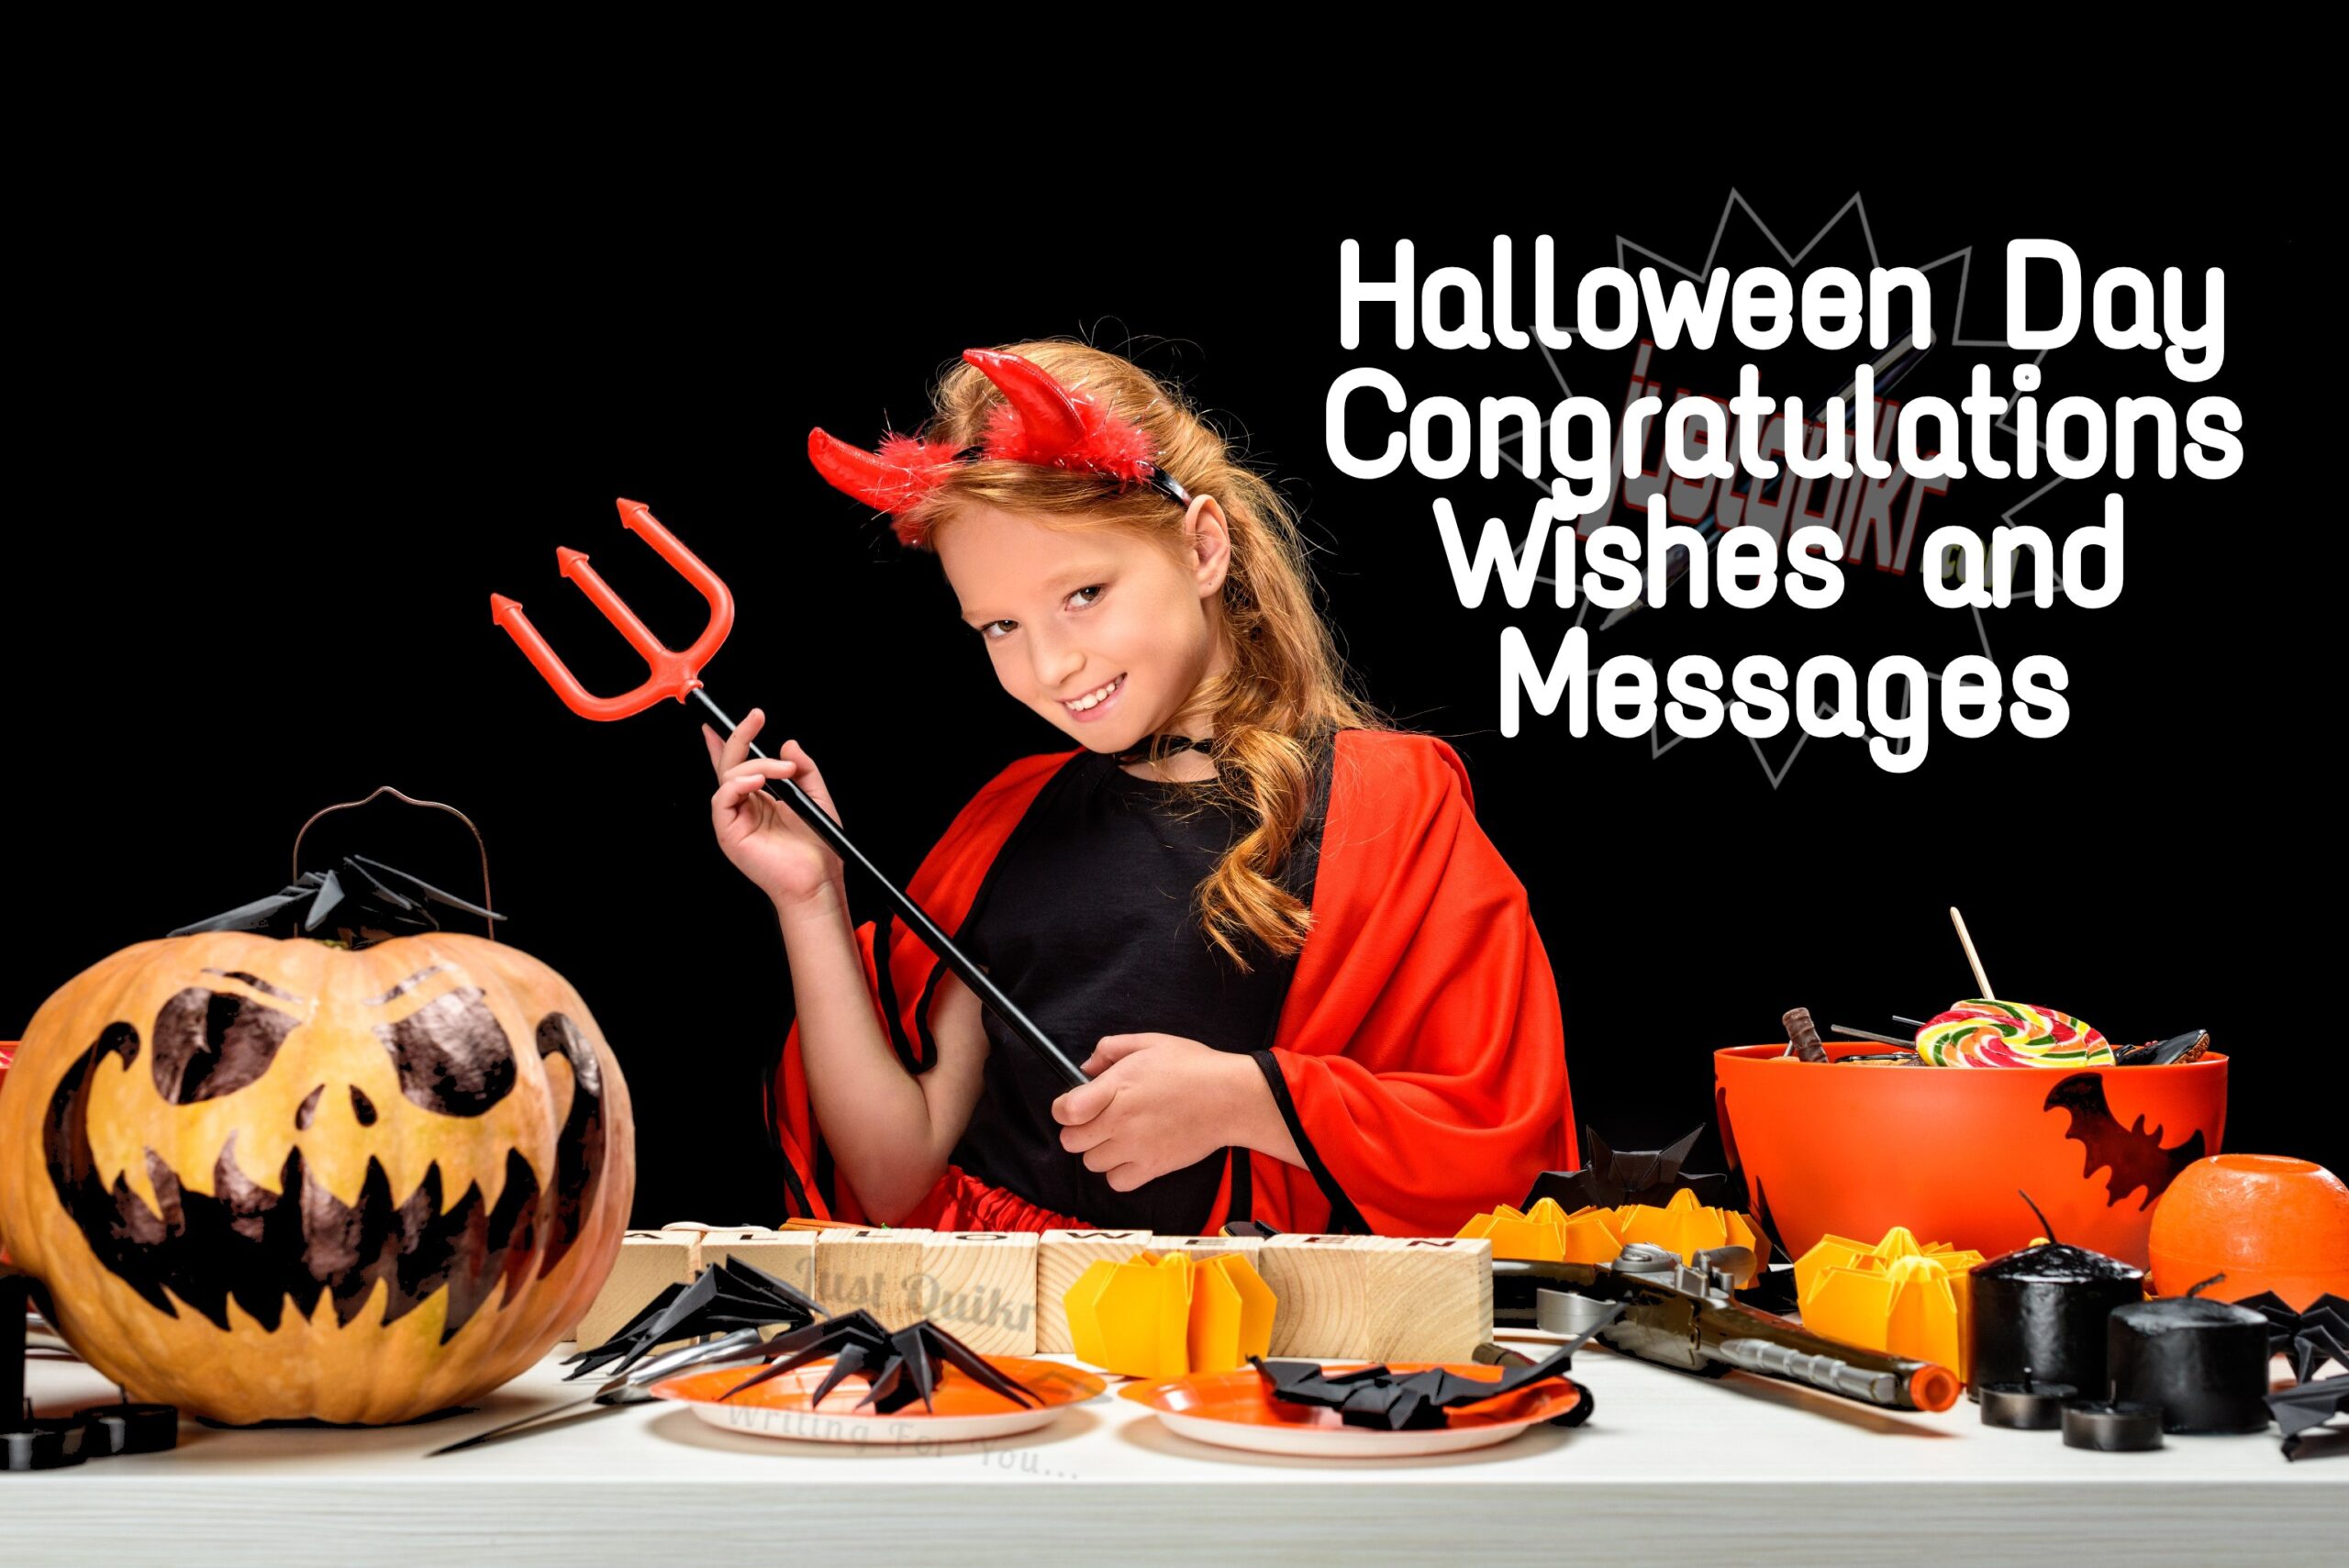 Halloween Day Congratulations Wishes and Messages